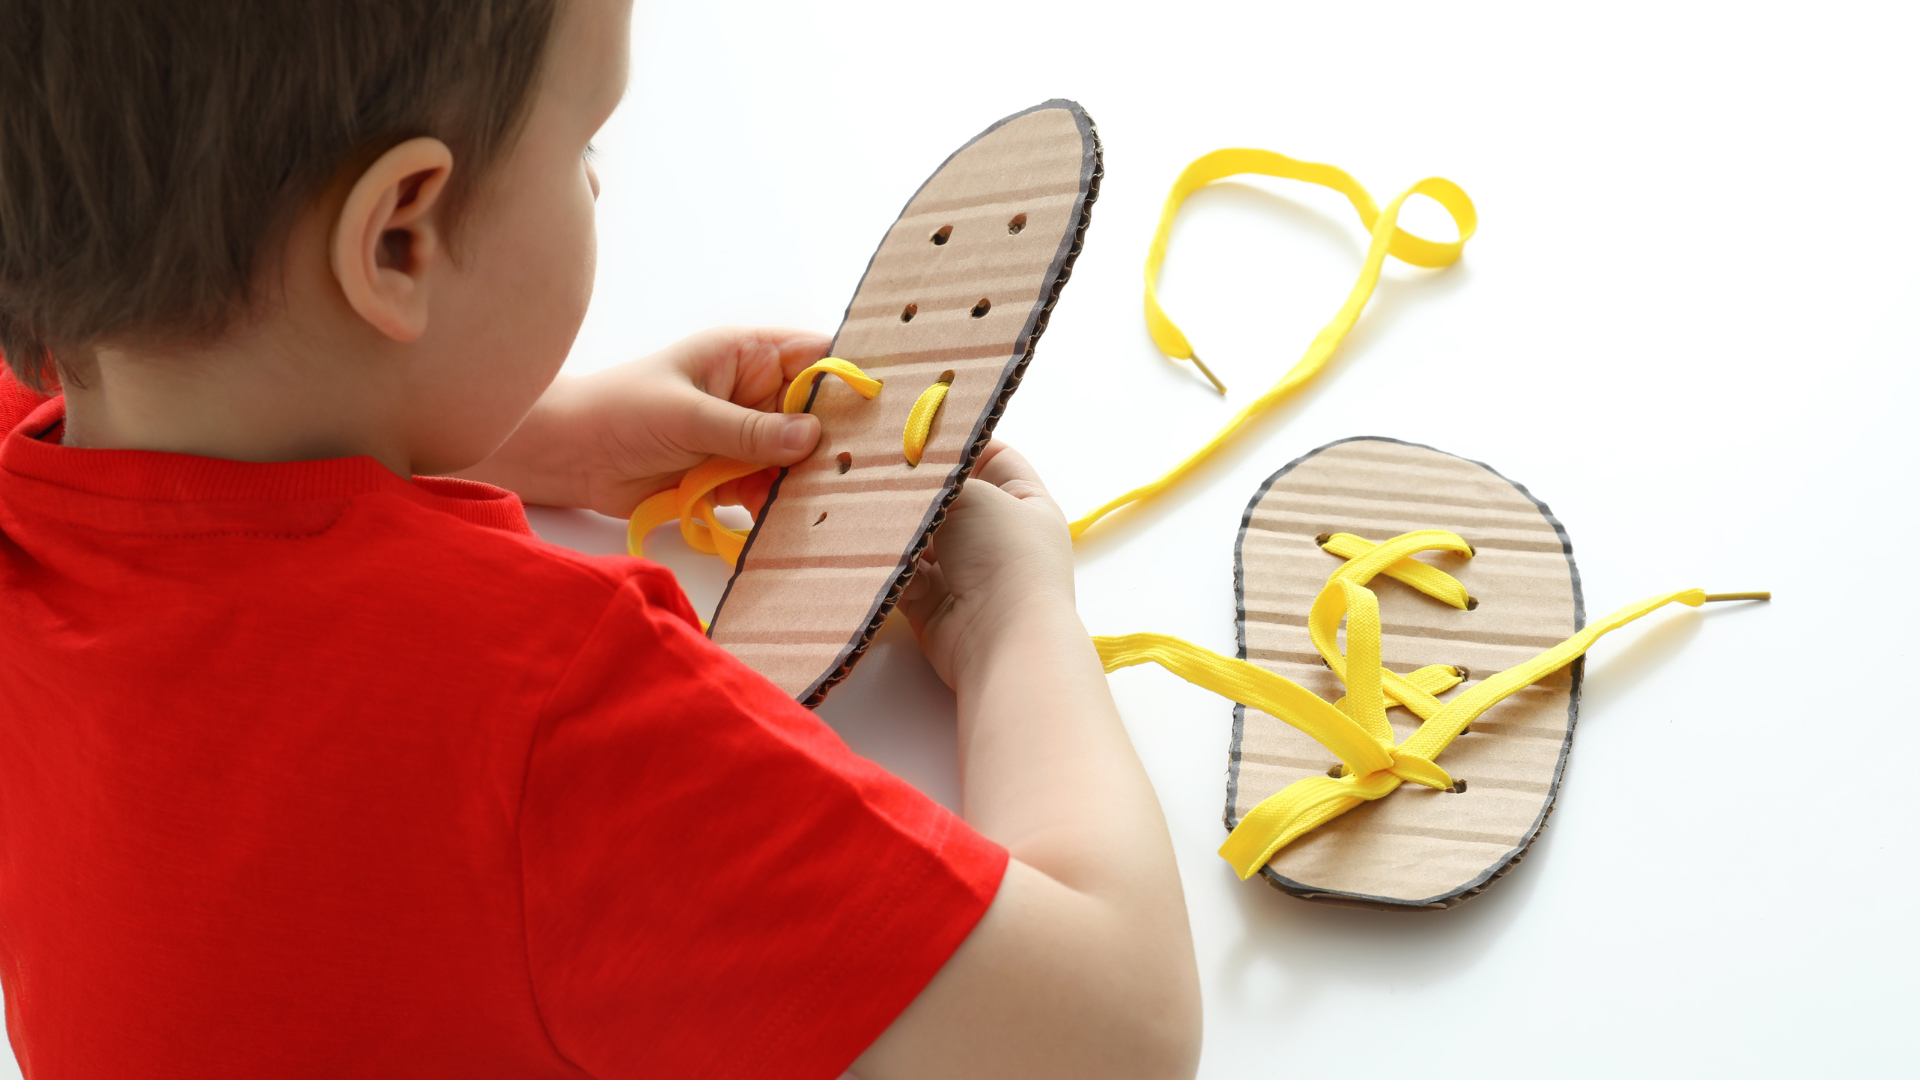 A Pegboard for Kids is a Great Fine Motor Skill Activity